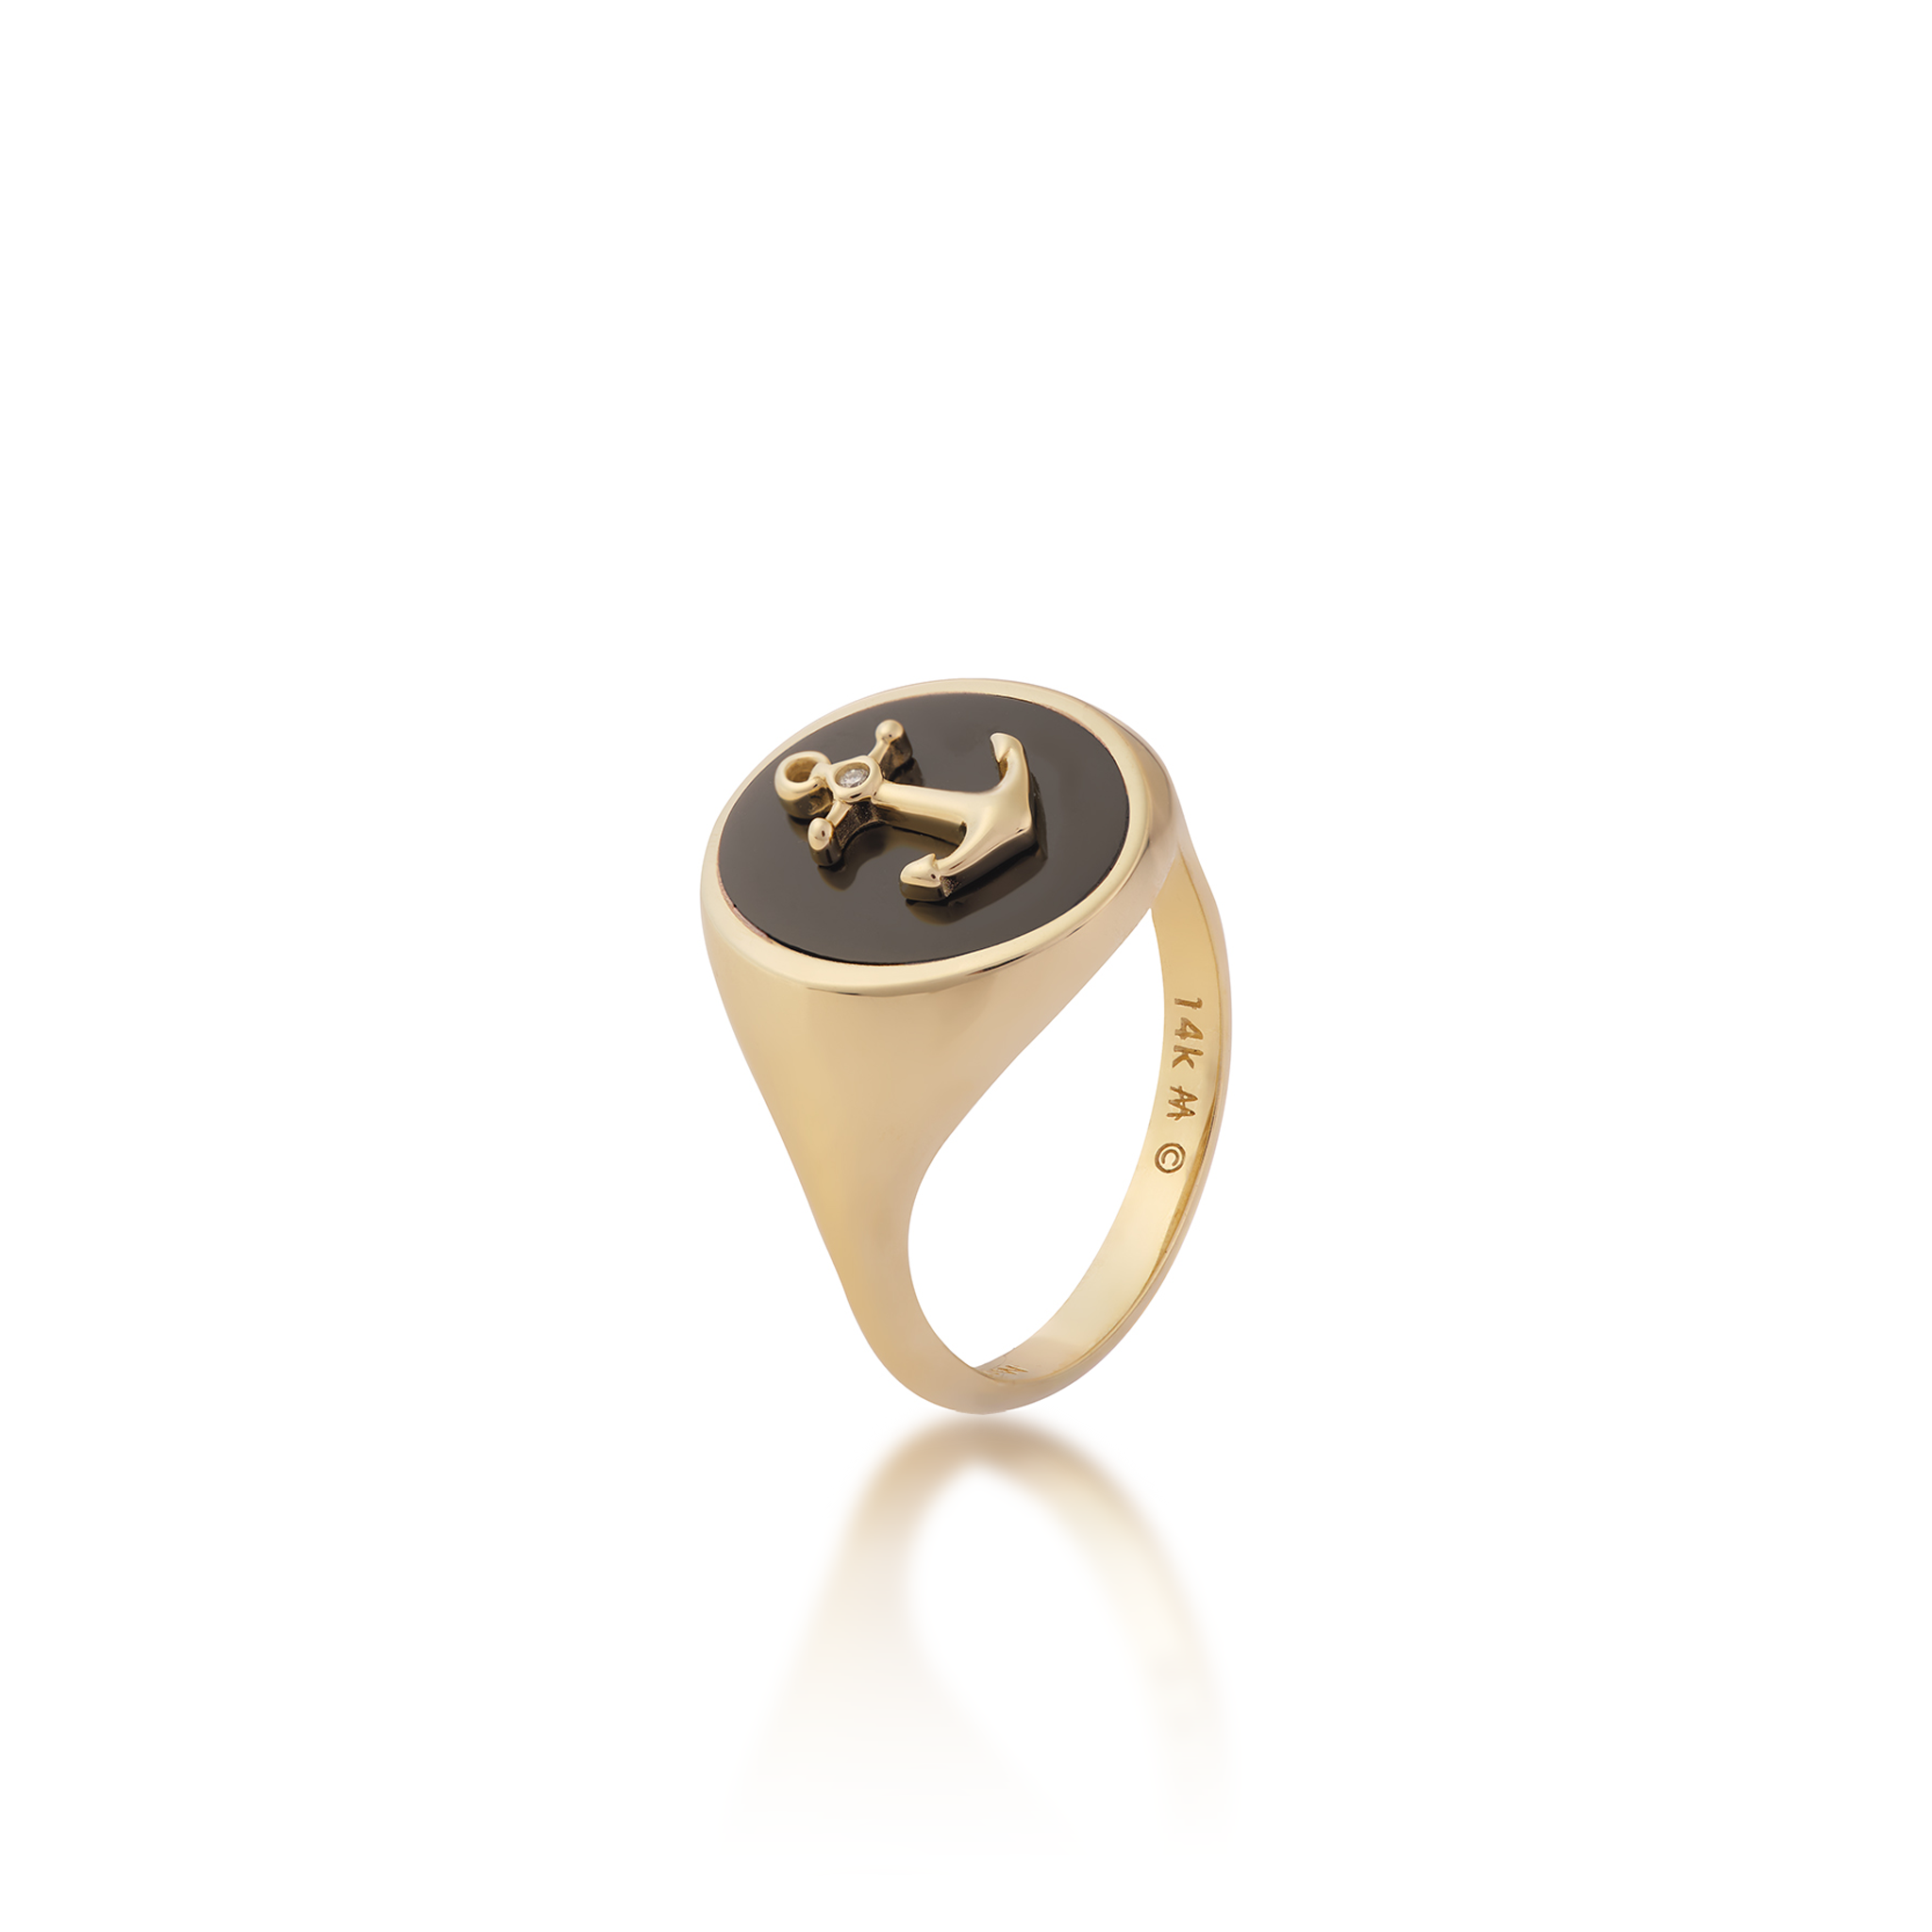 Sealife Anchor Signet Ring in Gold with Diamond - 14mm